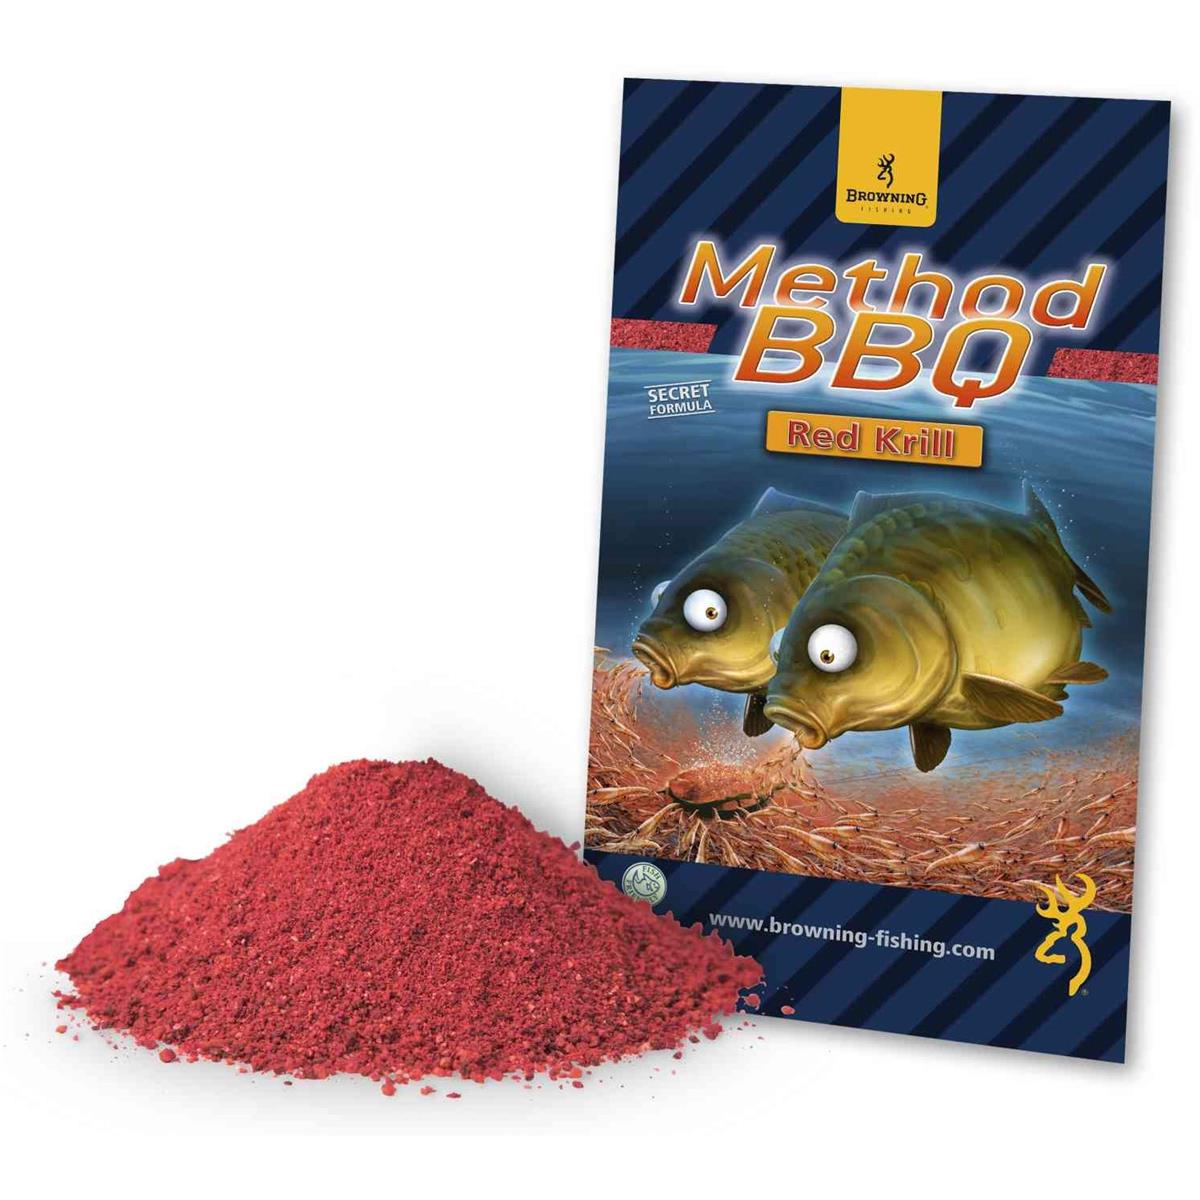 Browning Method BBQ Red Krill; 1 Kg.